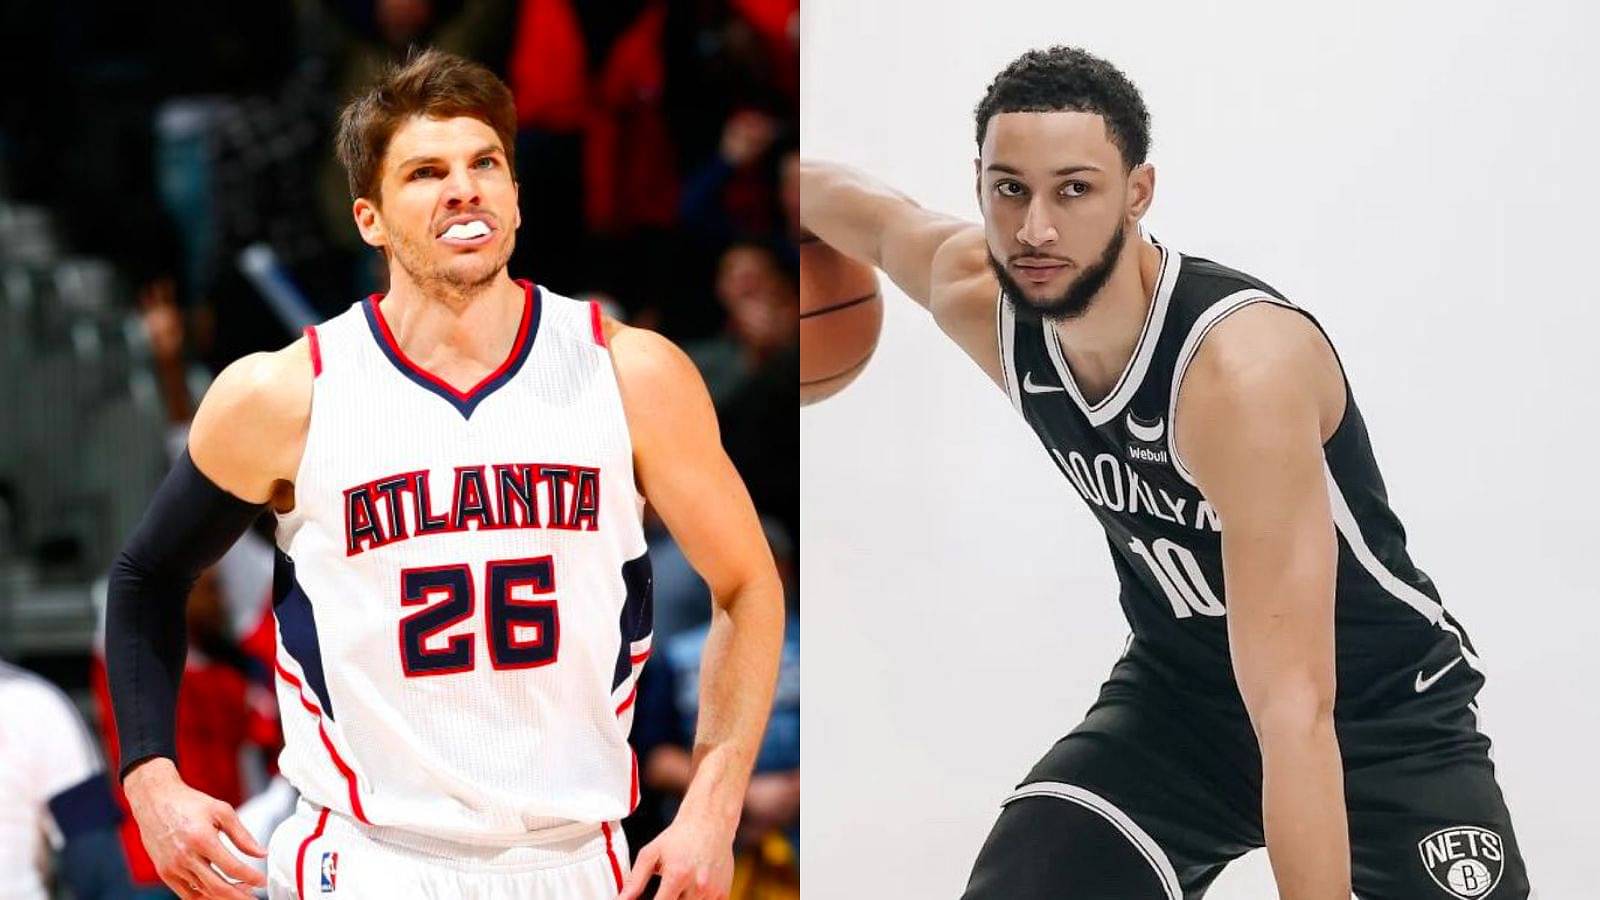 “Kyle Korver quit after trying to teach Ben Simmons how to shoot”: NBA Twitter trolls Nets star as former sharpshooter moves to a front office role in Atlanta